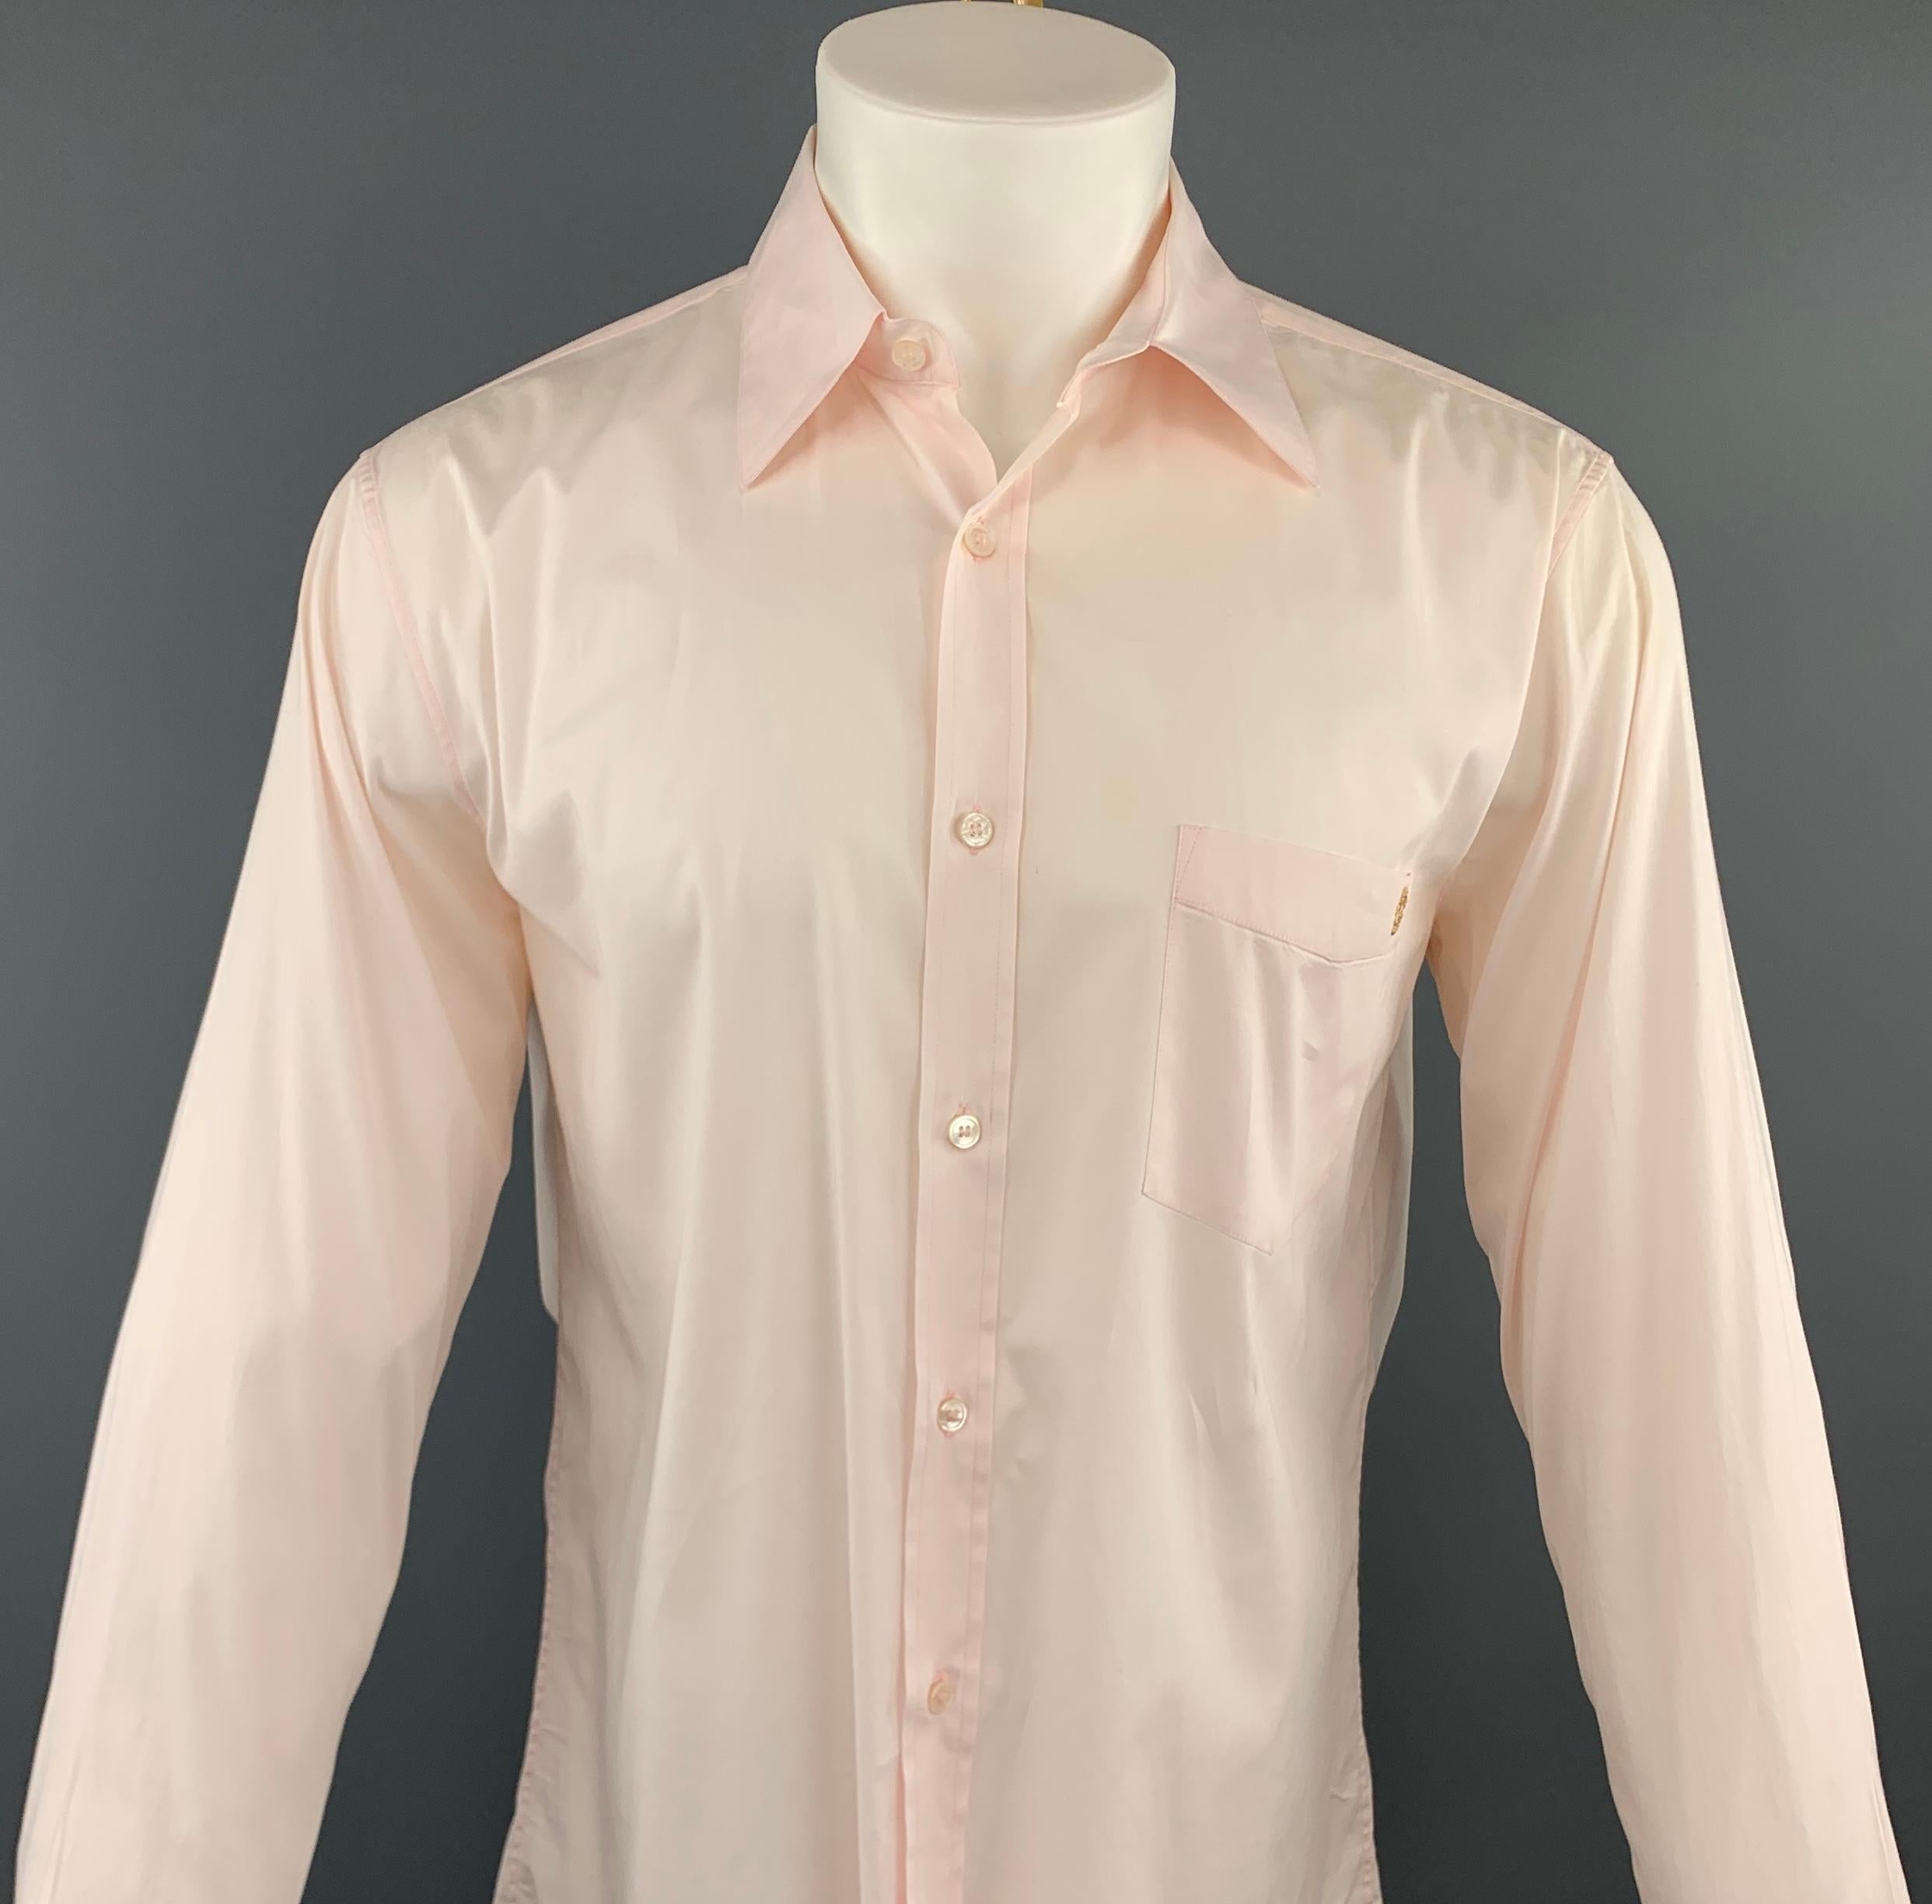 ALEXANDER MCQUEEN long sleeve shirt comes in a light pink cotton featuring a button up style, skull embroidered detail, and a front patch pocket. Made in Italy.
 
Excellent Pre-Owned Condition.
Marked: 50
 
Measurements:
 
Shoulder: 19 in.
Chest: 48